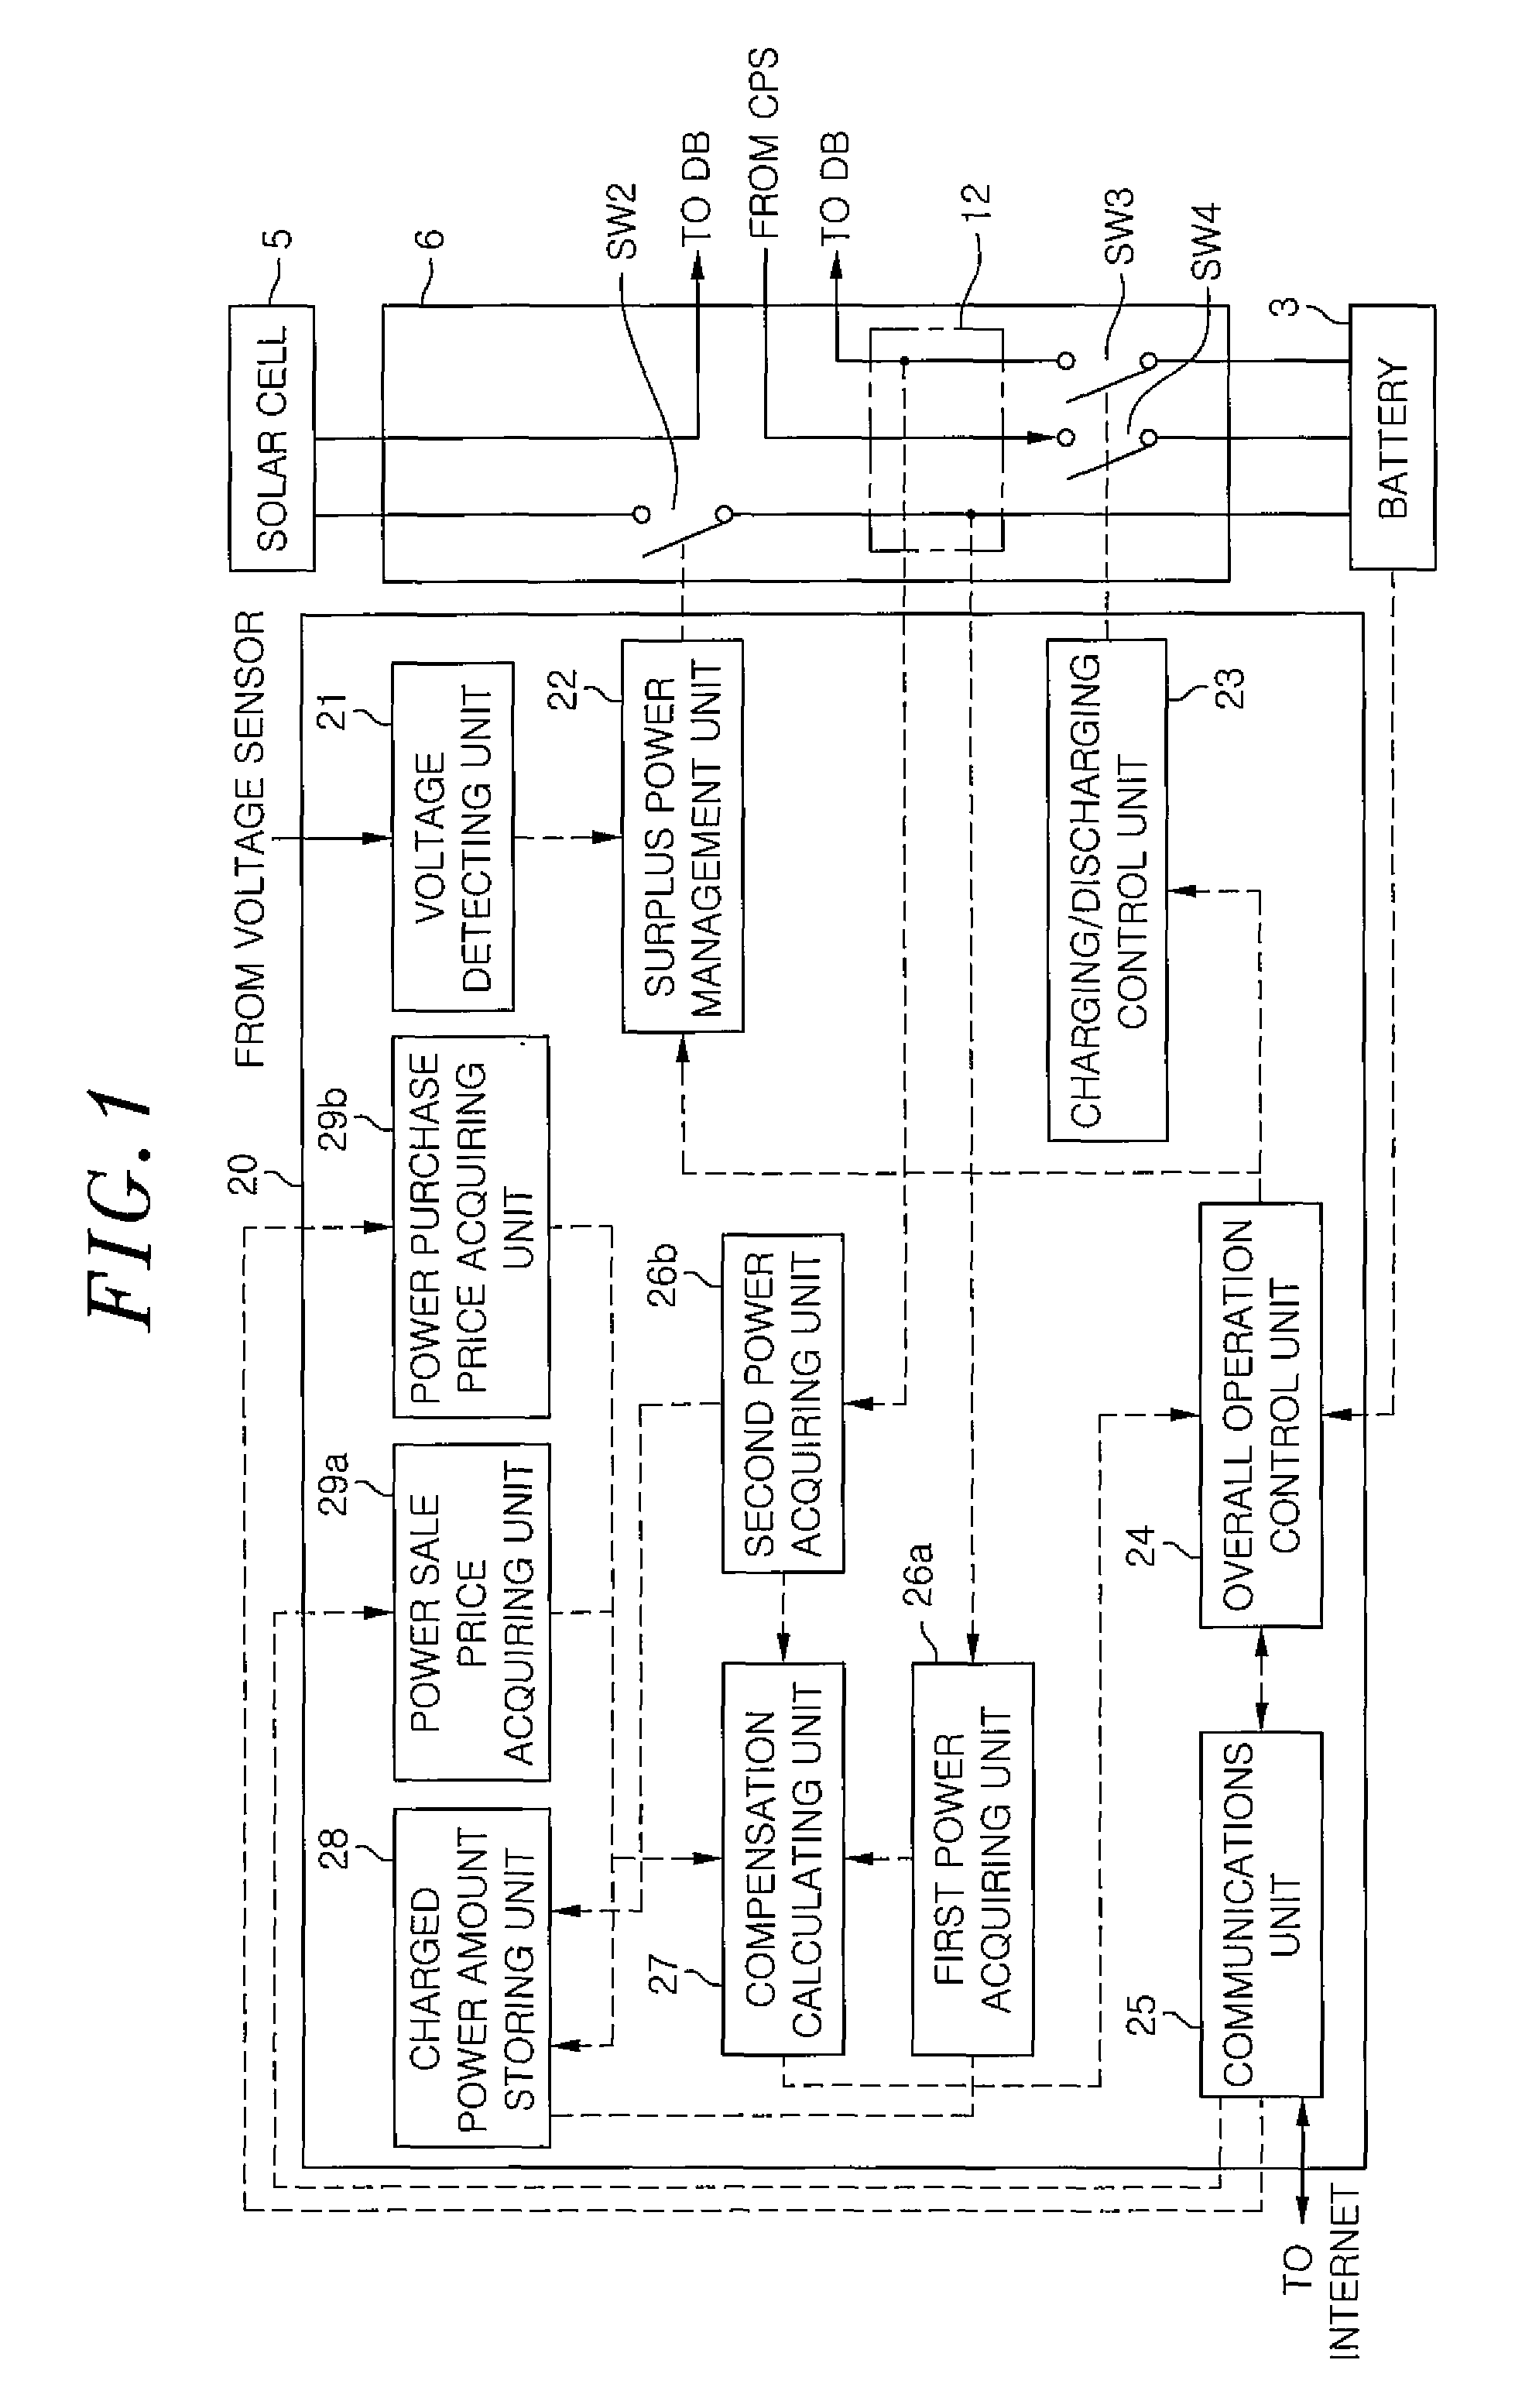 Electric power control apparatus and grid connection system having same